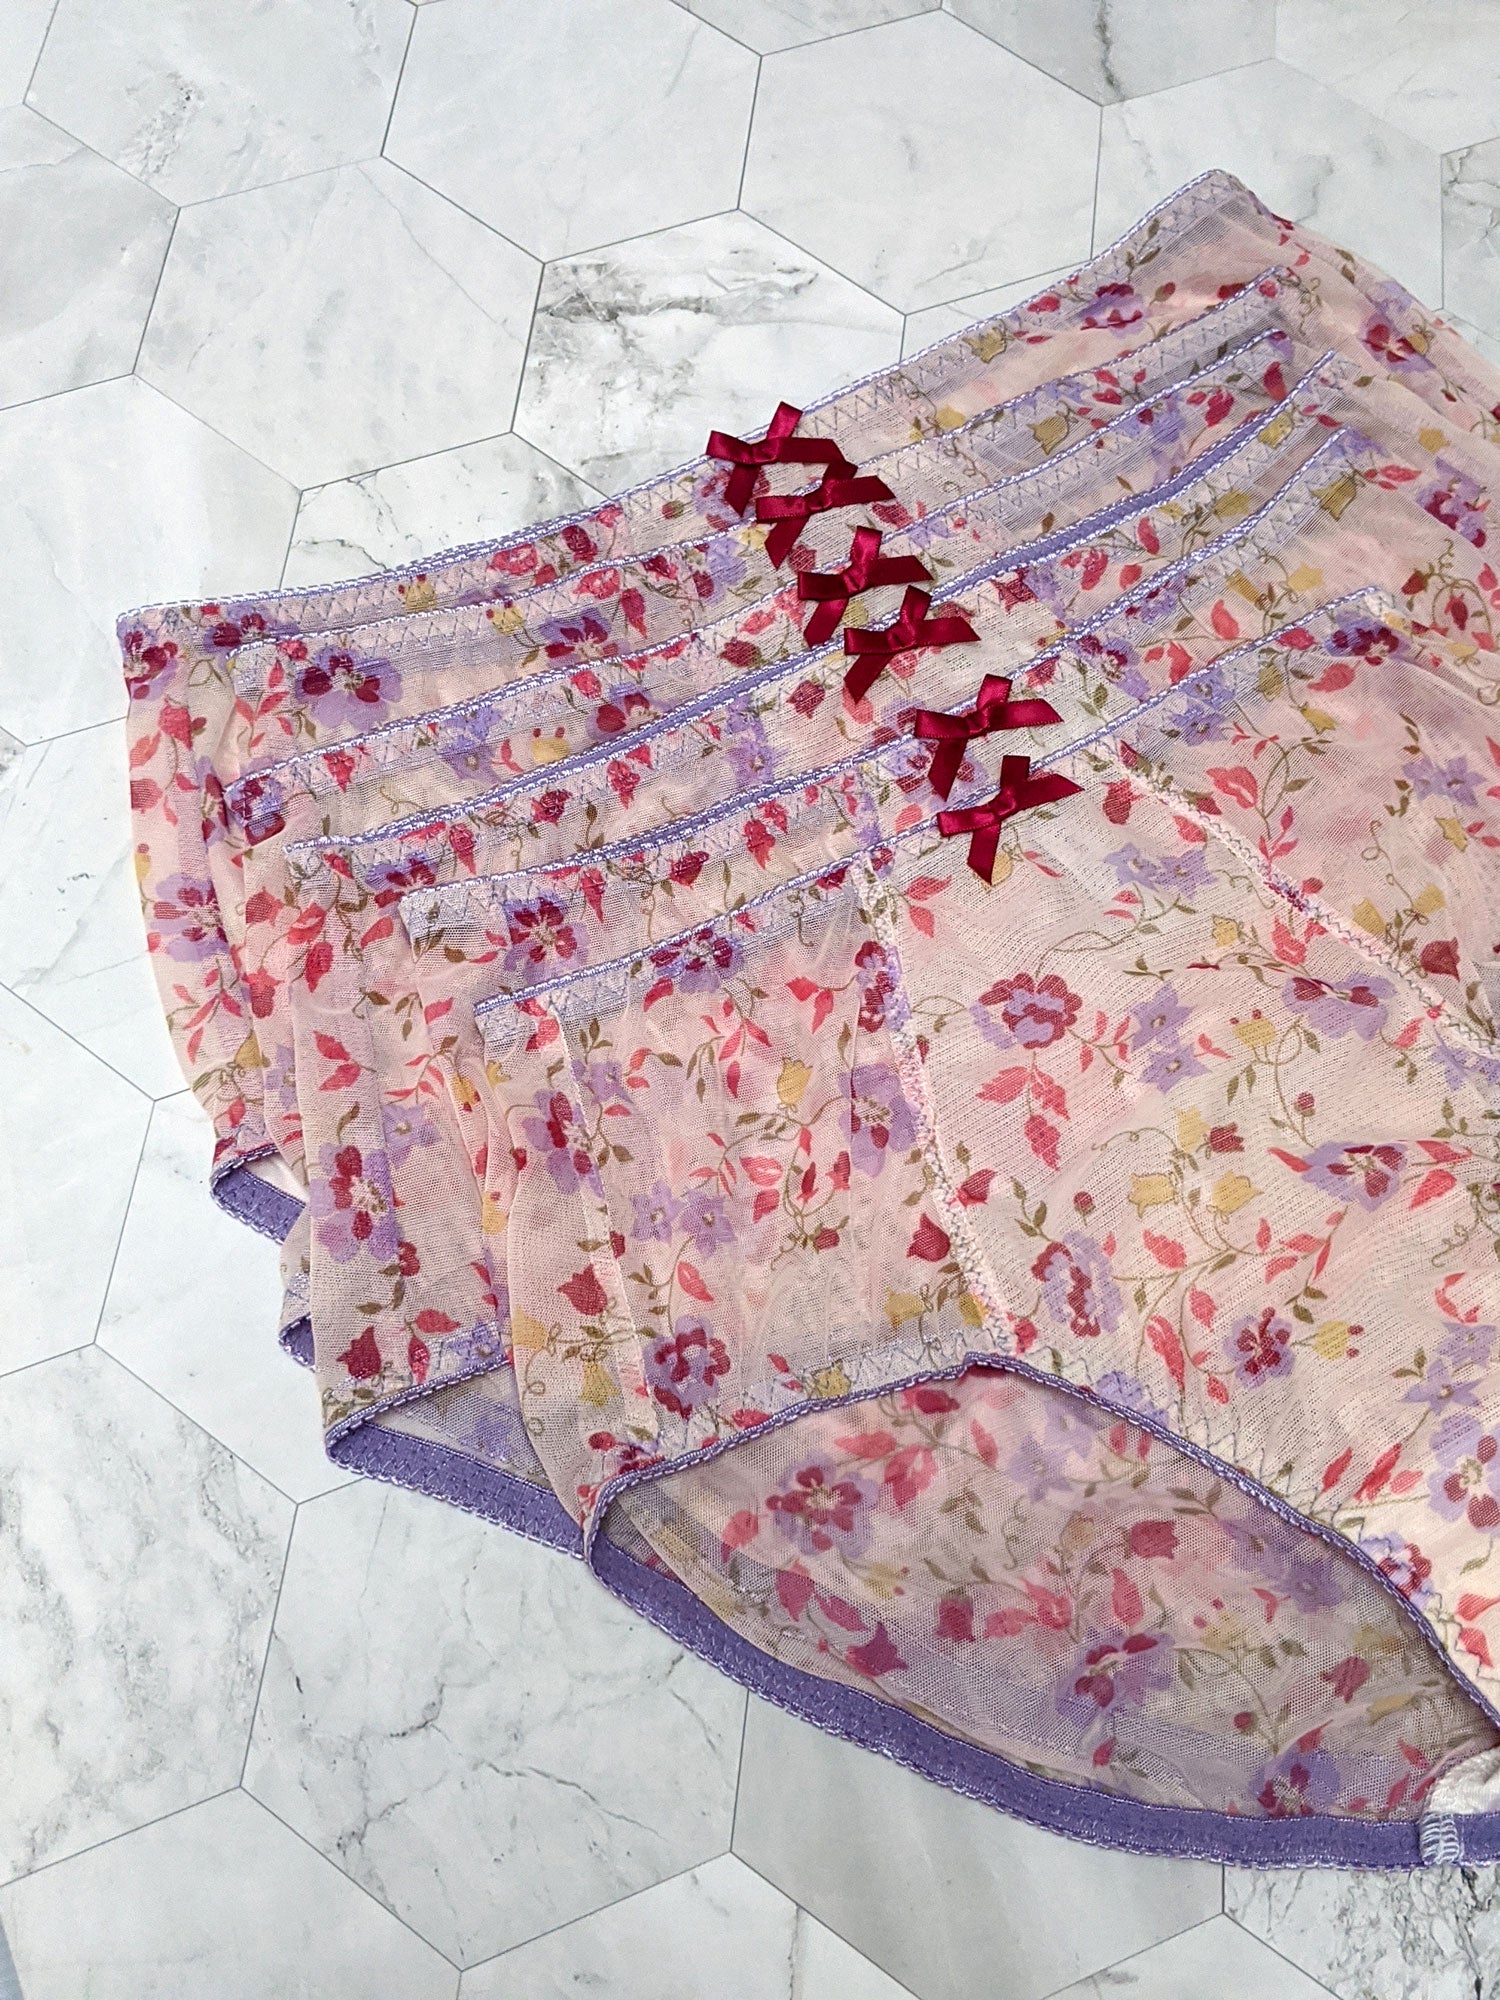 Floral printed, hi waist panties with purple and red bows and mesh